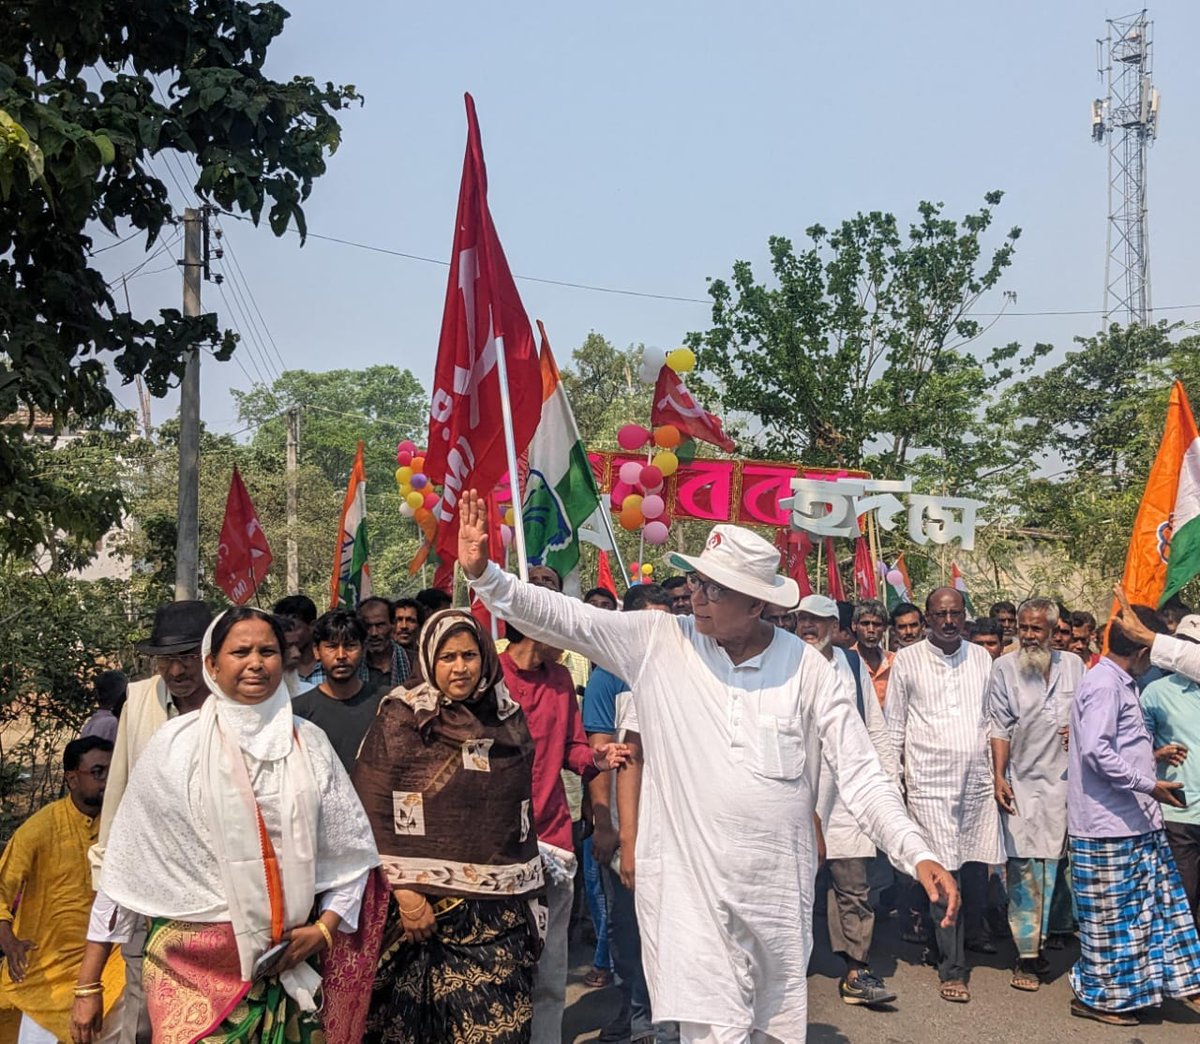 In West Bengal, CPI(M) candidates are fervently carrying out grassroots electoral campaign activities across the state. They are urging citizens to reject both TMC and BJP and advocating for the endorsement of the Left's secular, democratic, and pro-people policies at the ballot…